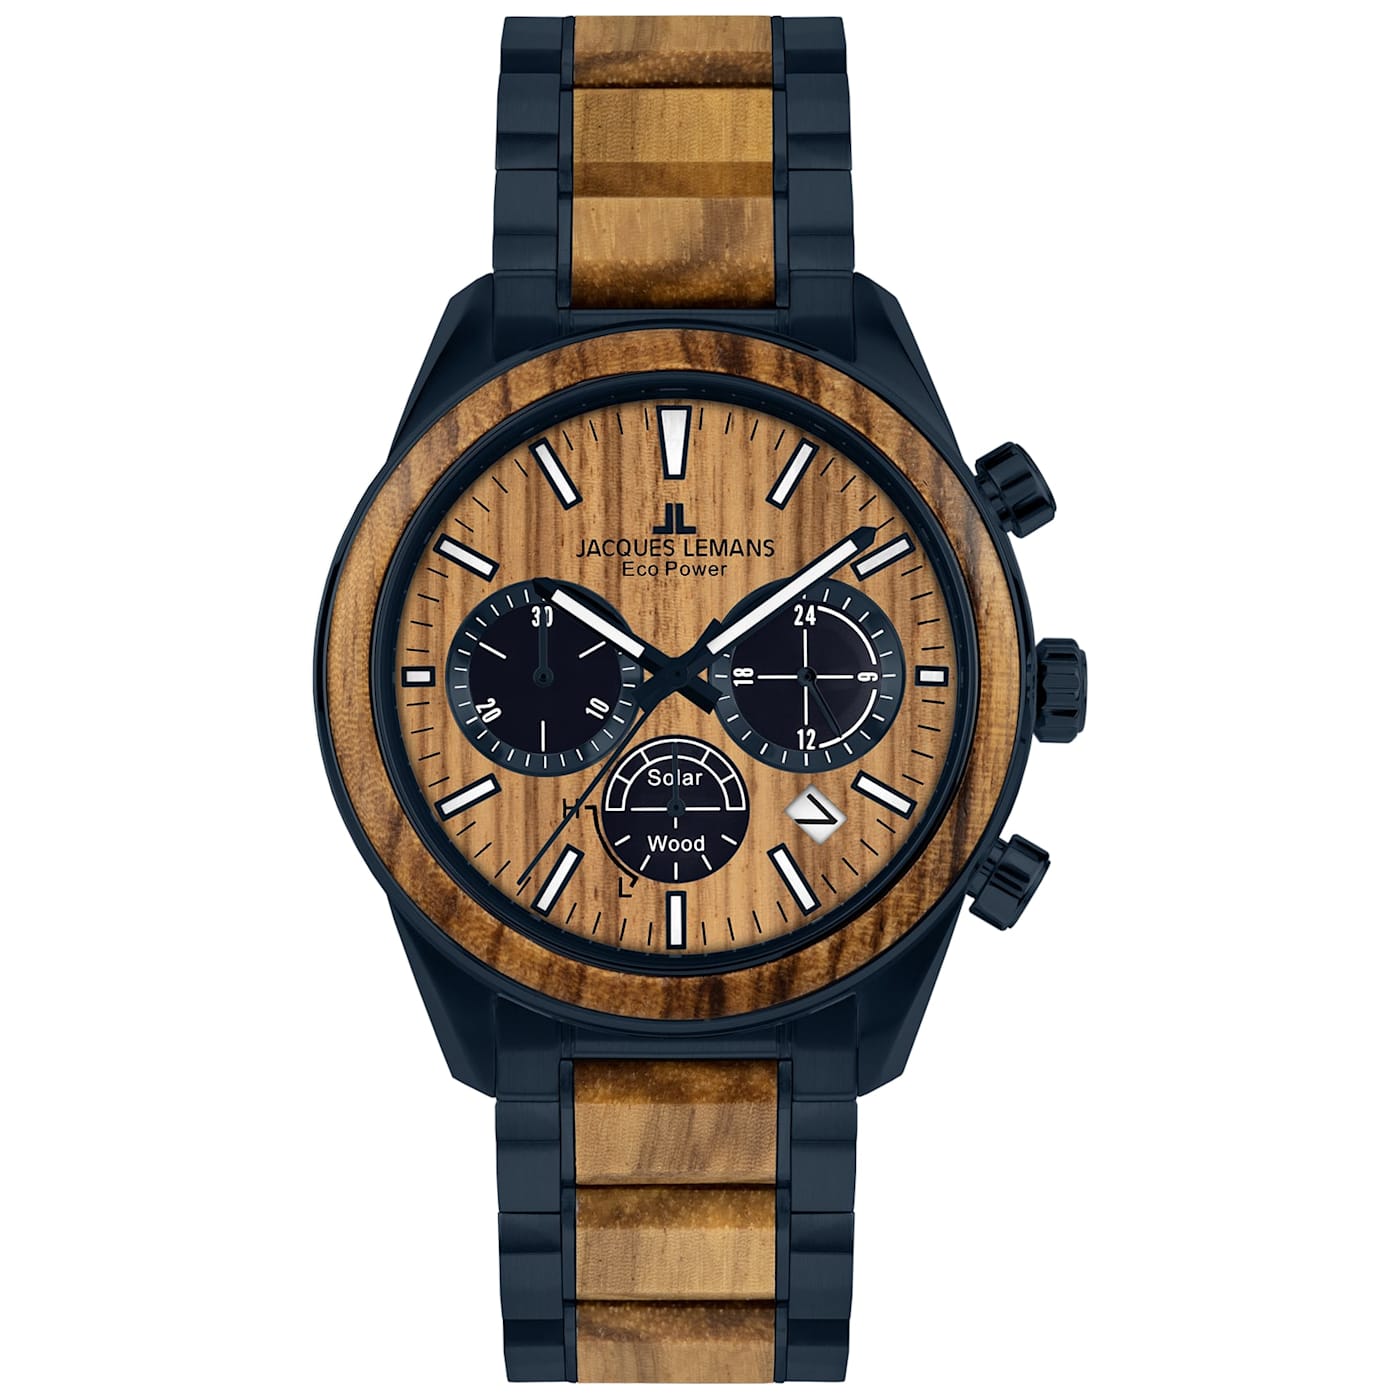 JACQUES LEMANS Eco Power Men\'s Watch w/Stainless Steel/Wood Inlay Strap  Blue, Chronograph 1-2115 - 12KT3A | Solaruhren